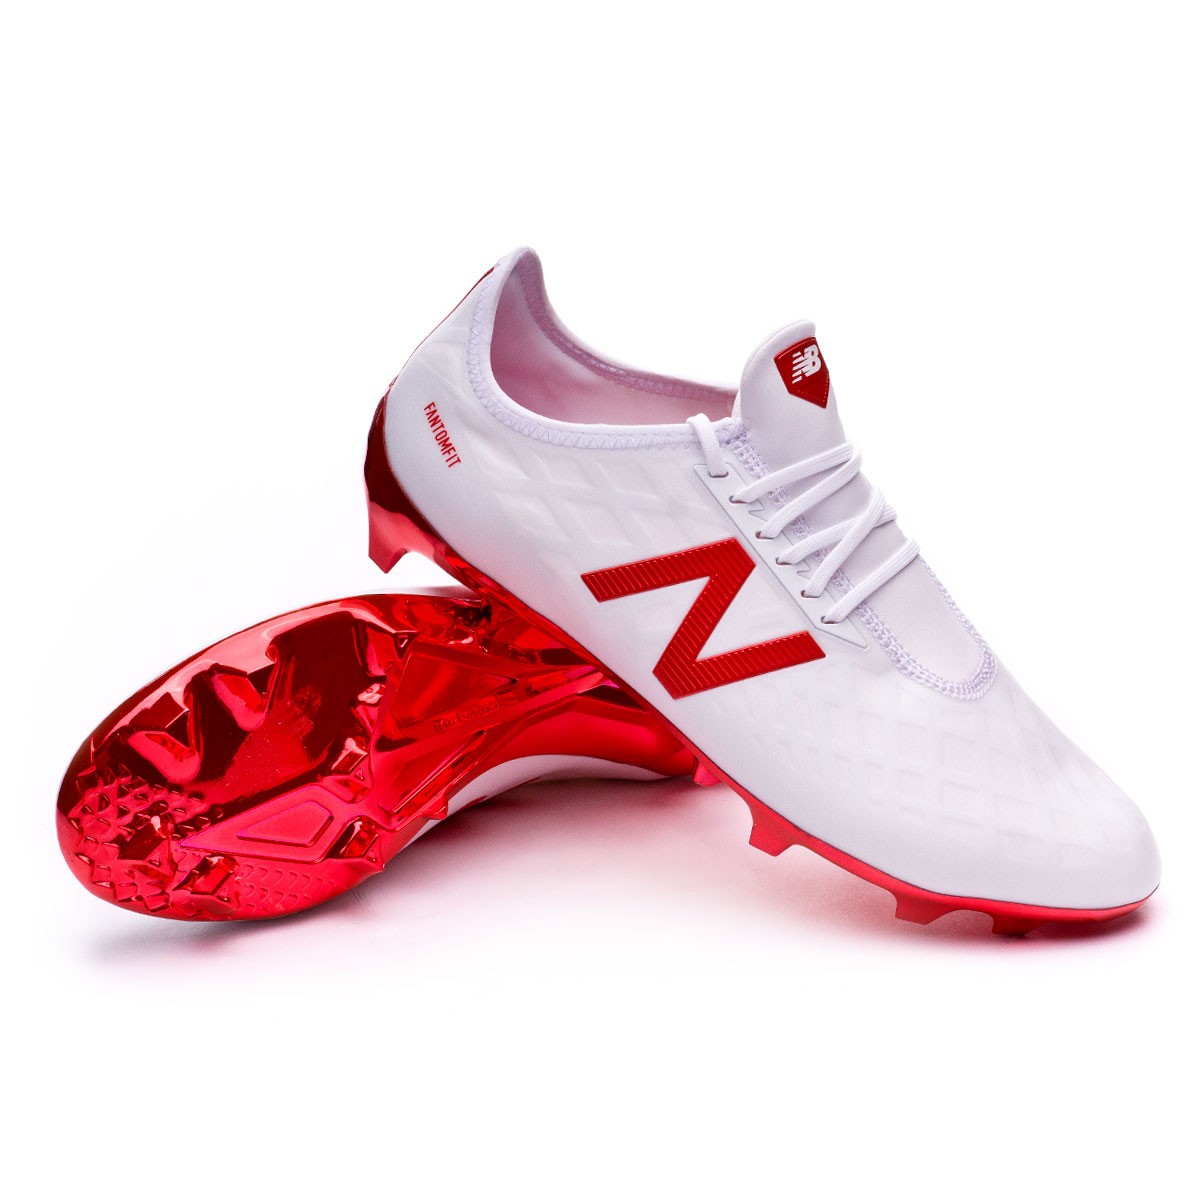 new balance football boots white Online 